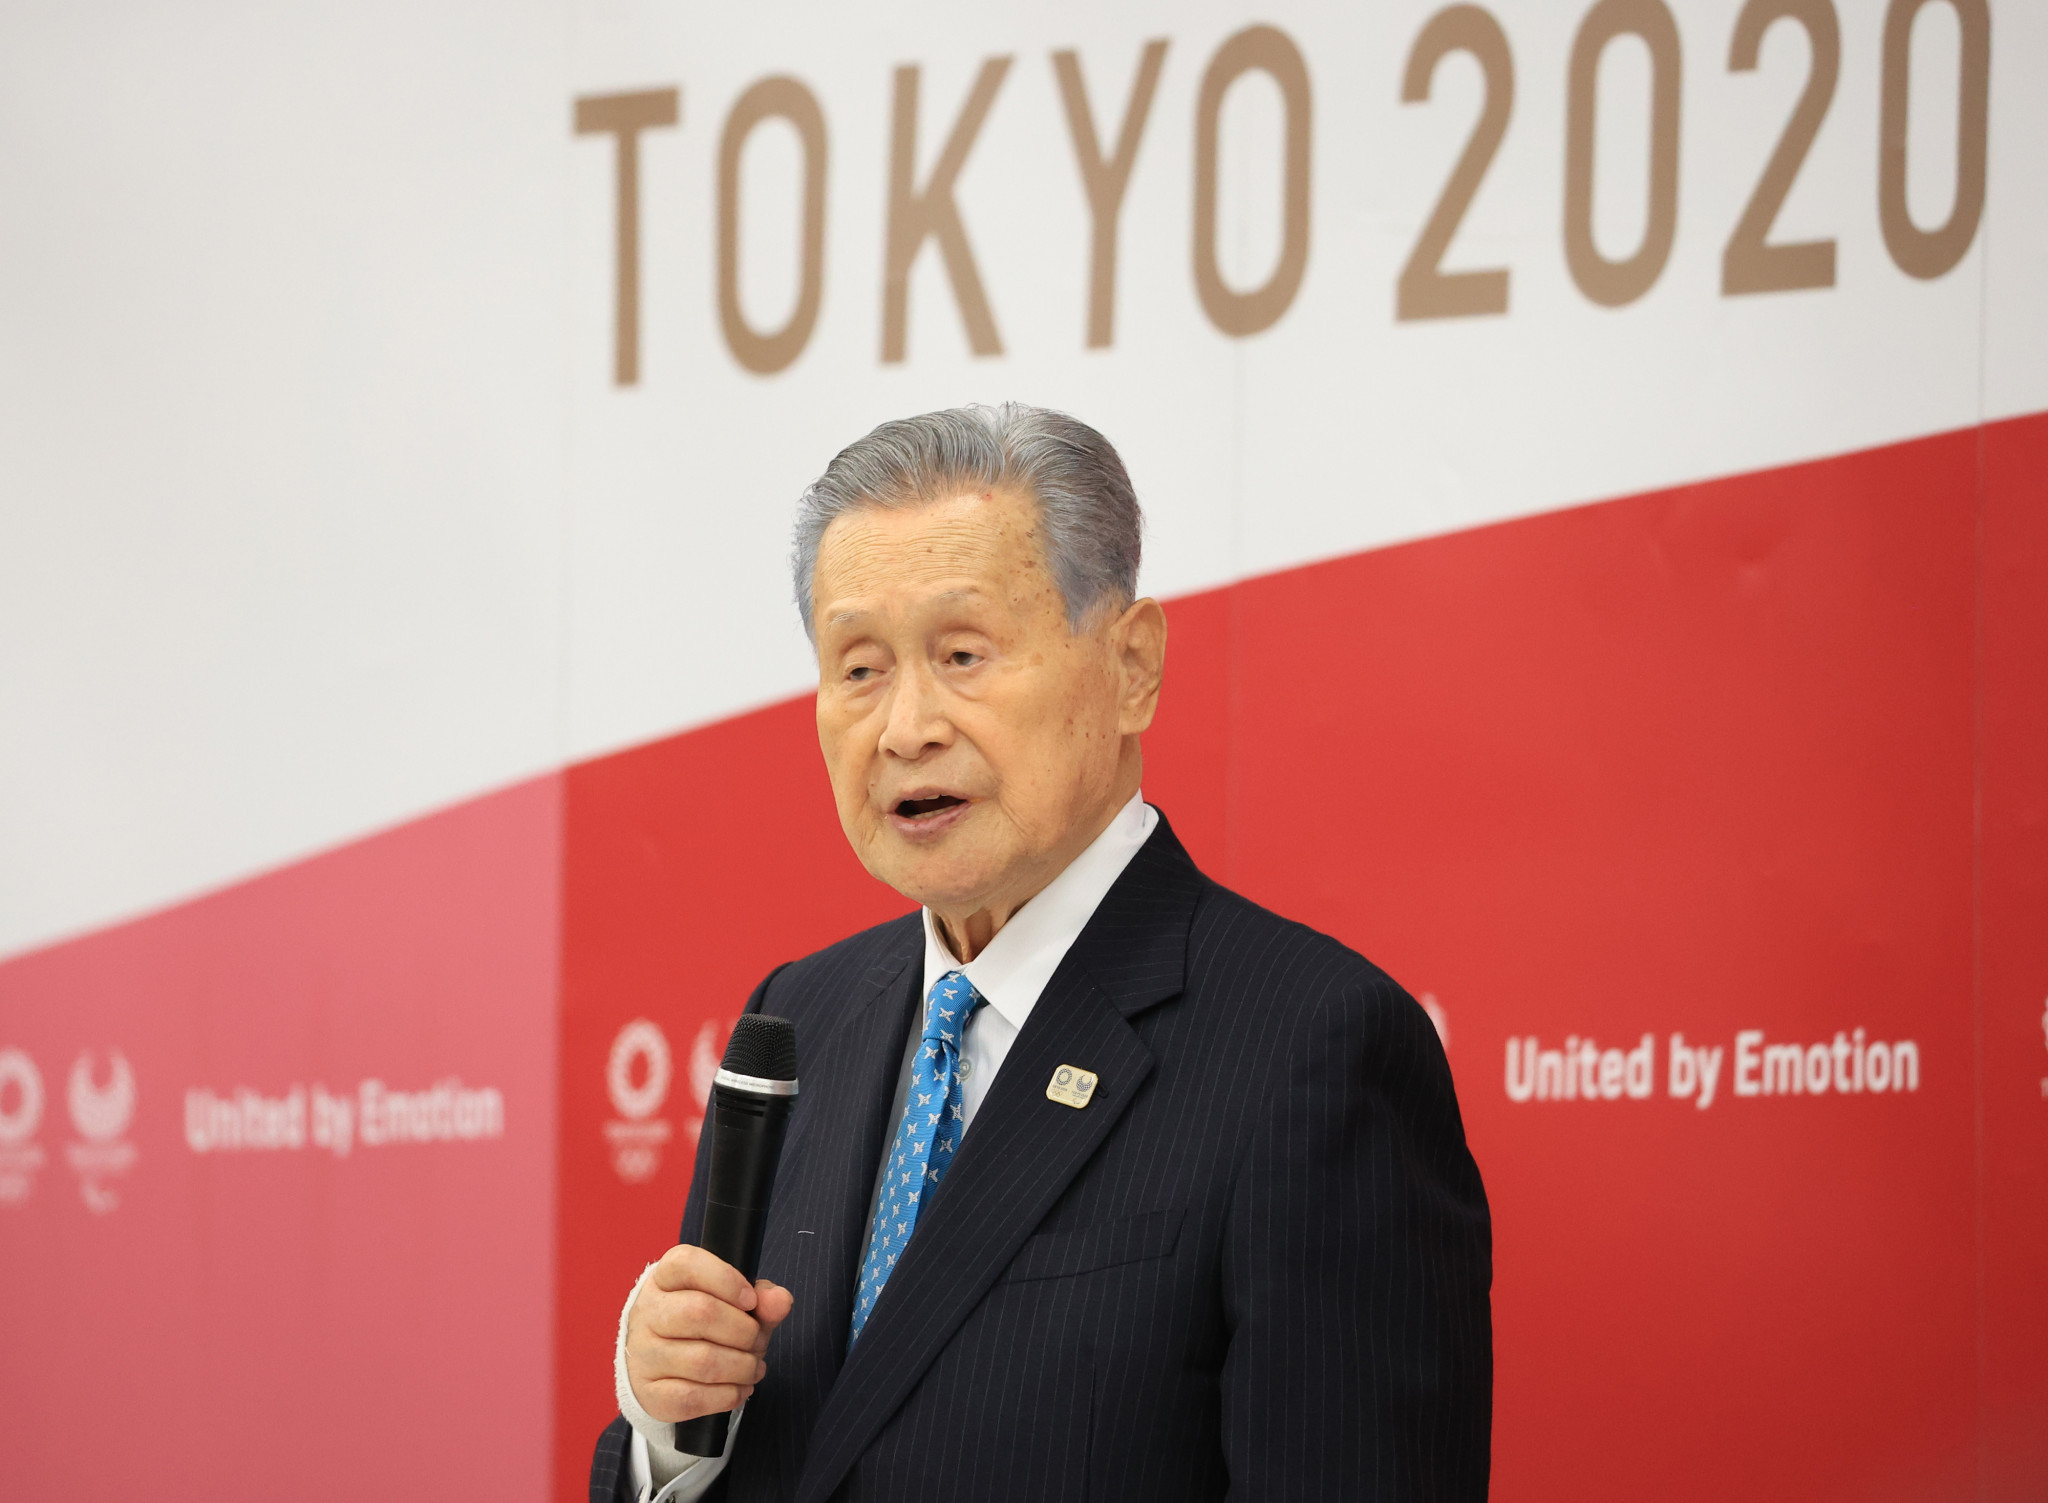 Former Tokyo 2020 President Yoshirō Mori sparked a sexism row which resulted in the resignation of hundreds of volunteers ©Getty Images